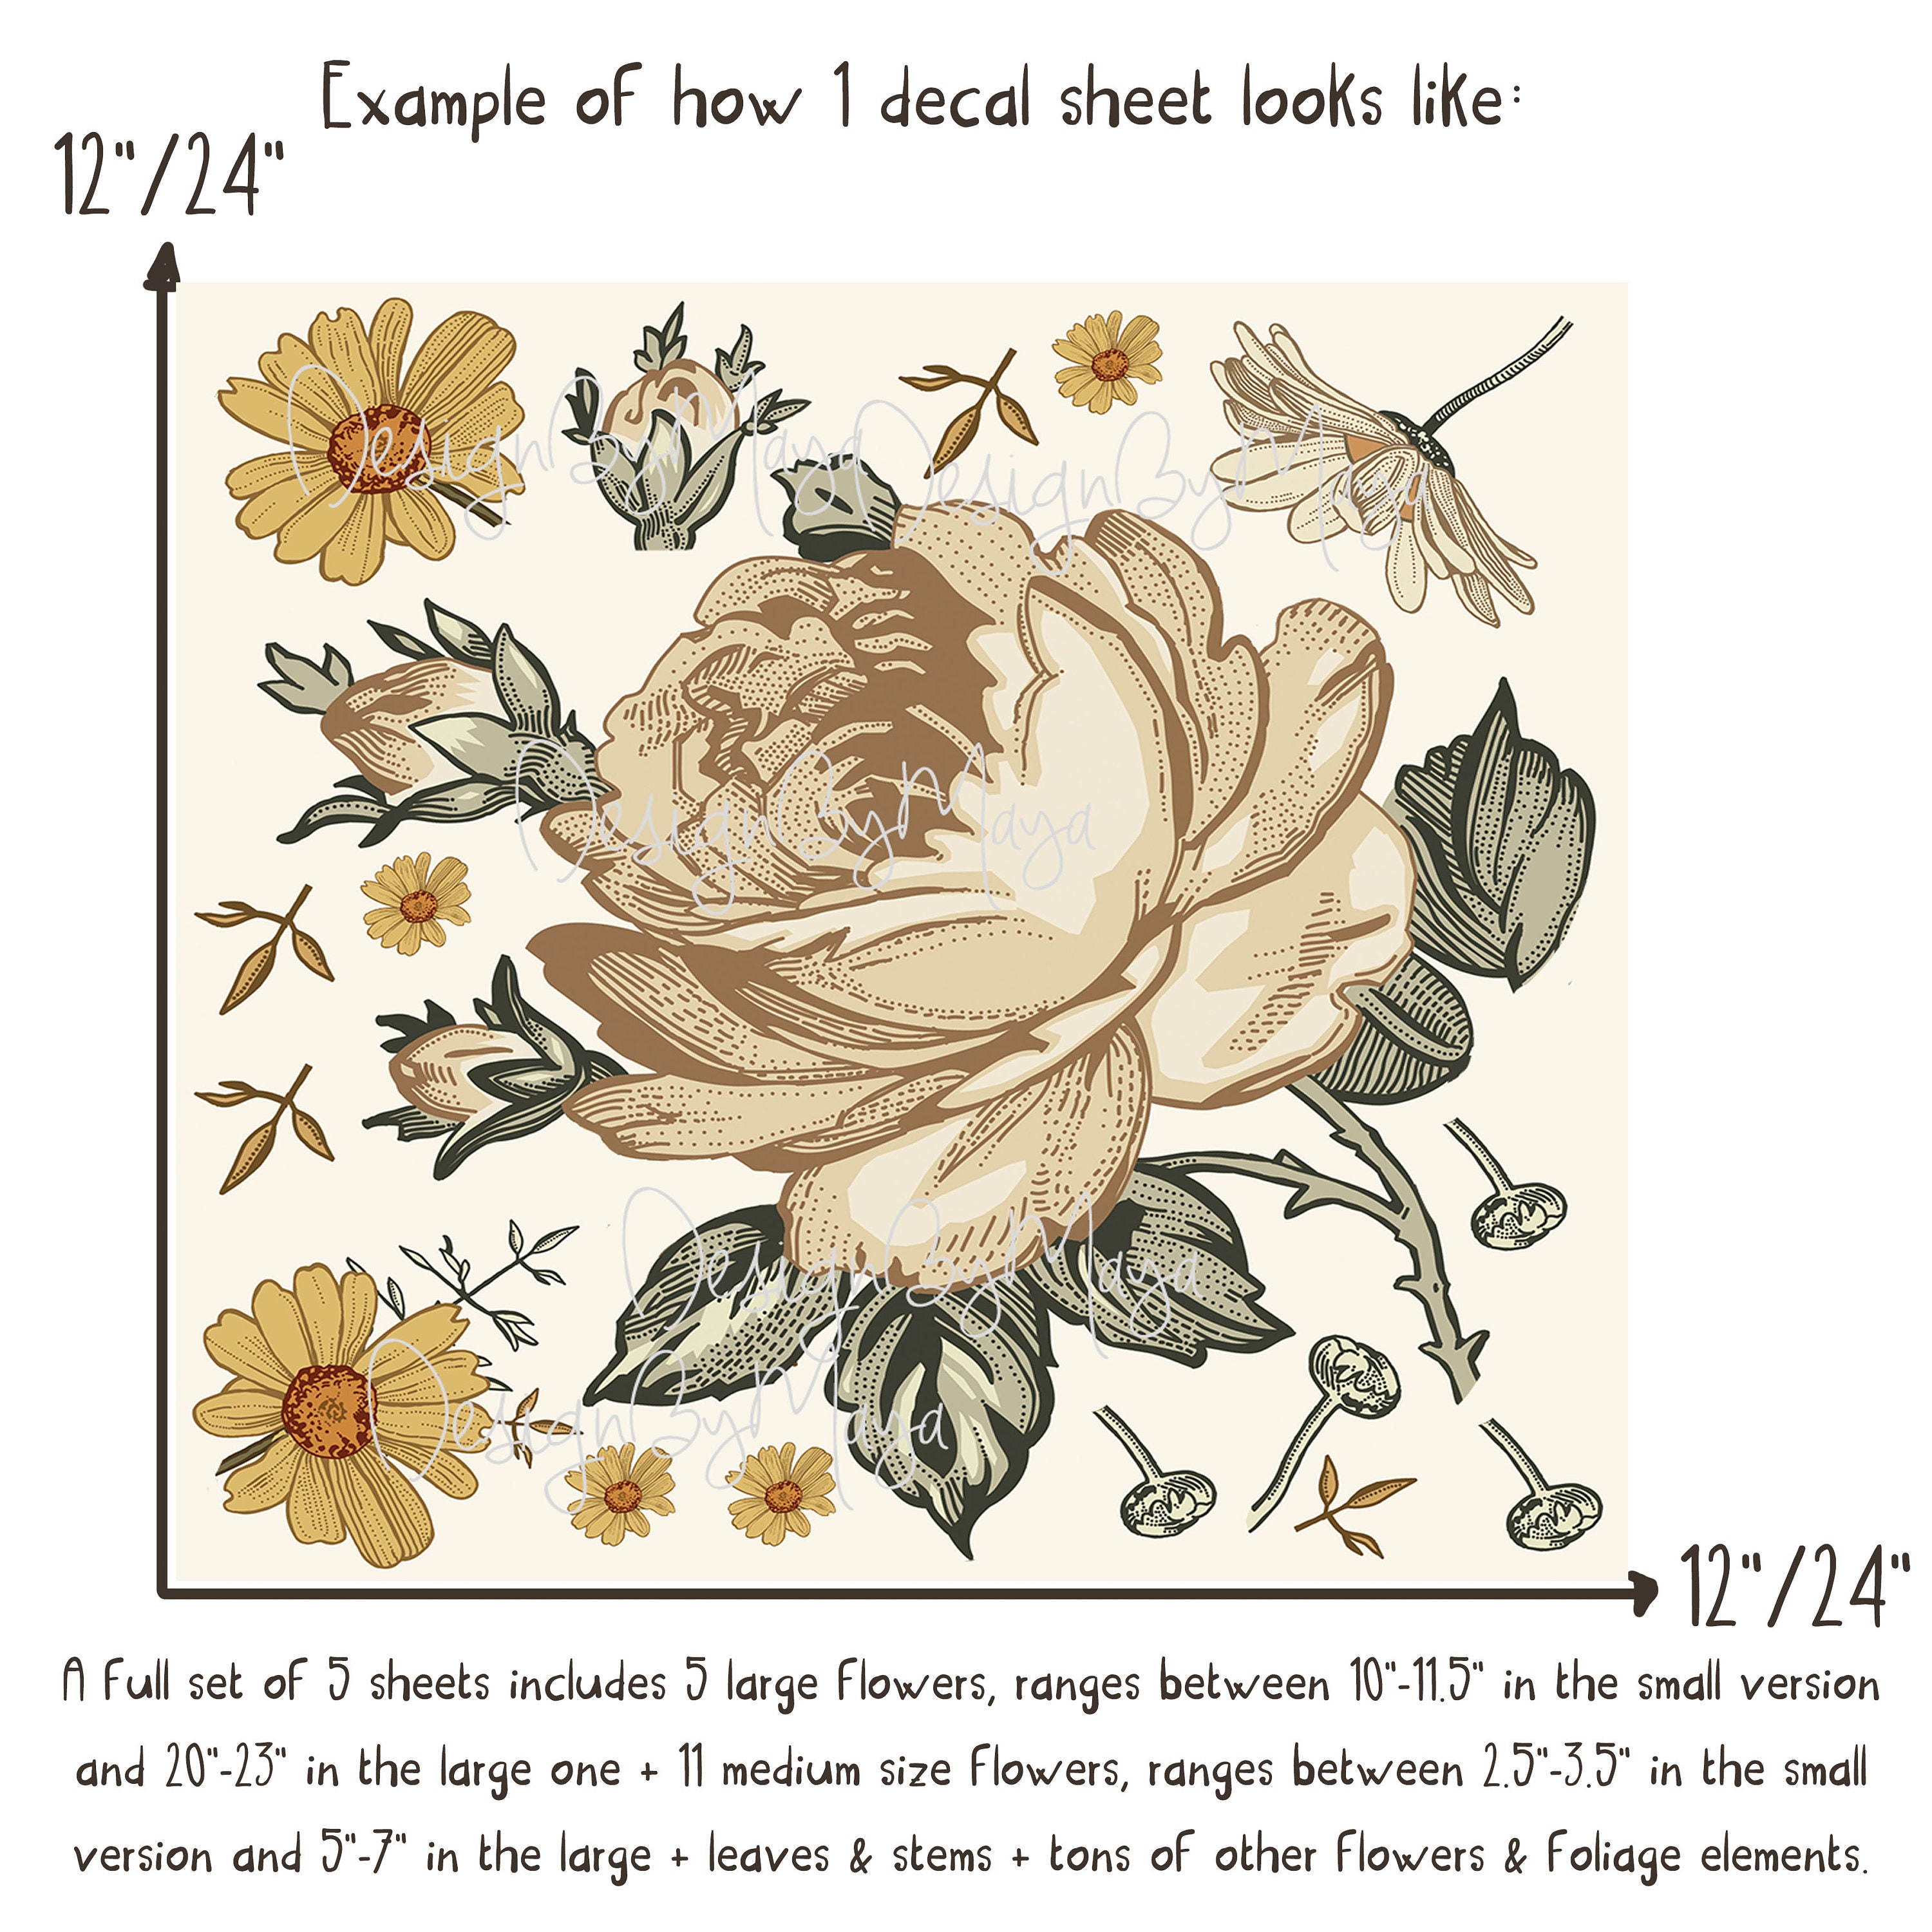 Gold Large Flower Decals